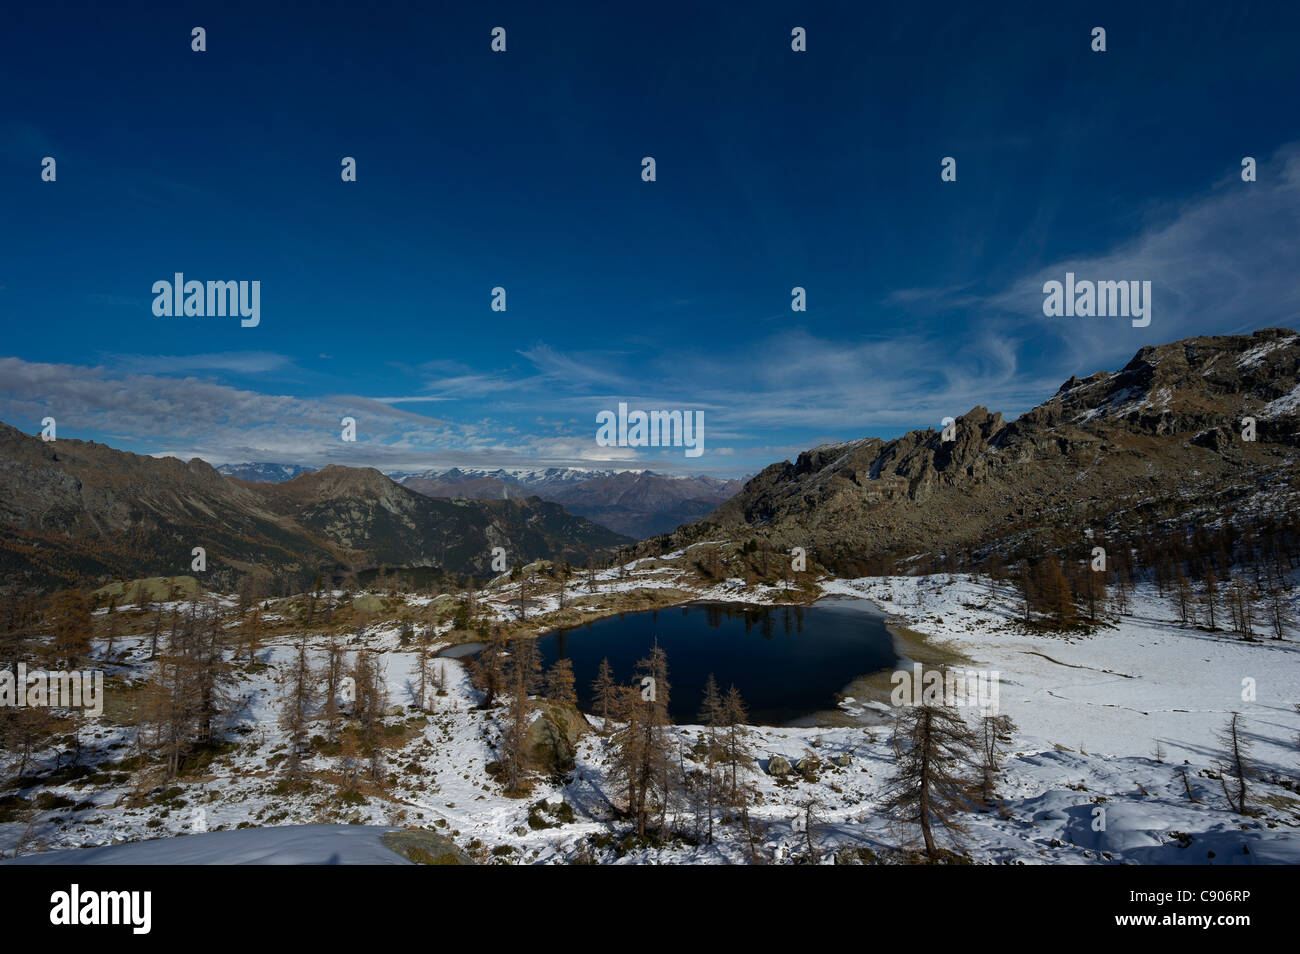 Italy, Aosta valley, mount Avic regional park, mountain landscape with an alpine lake Stock Photo